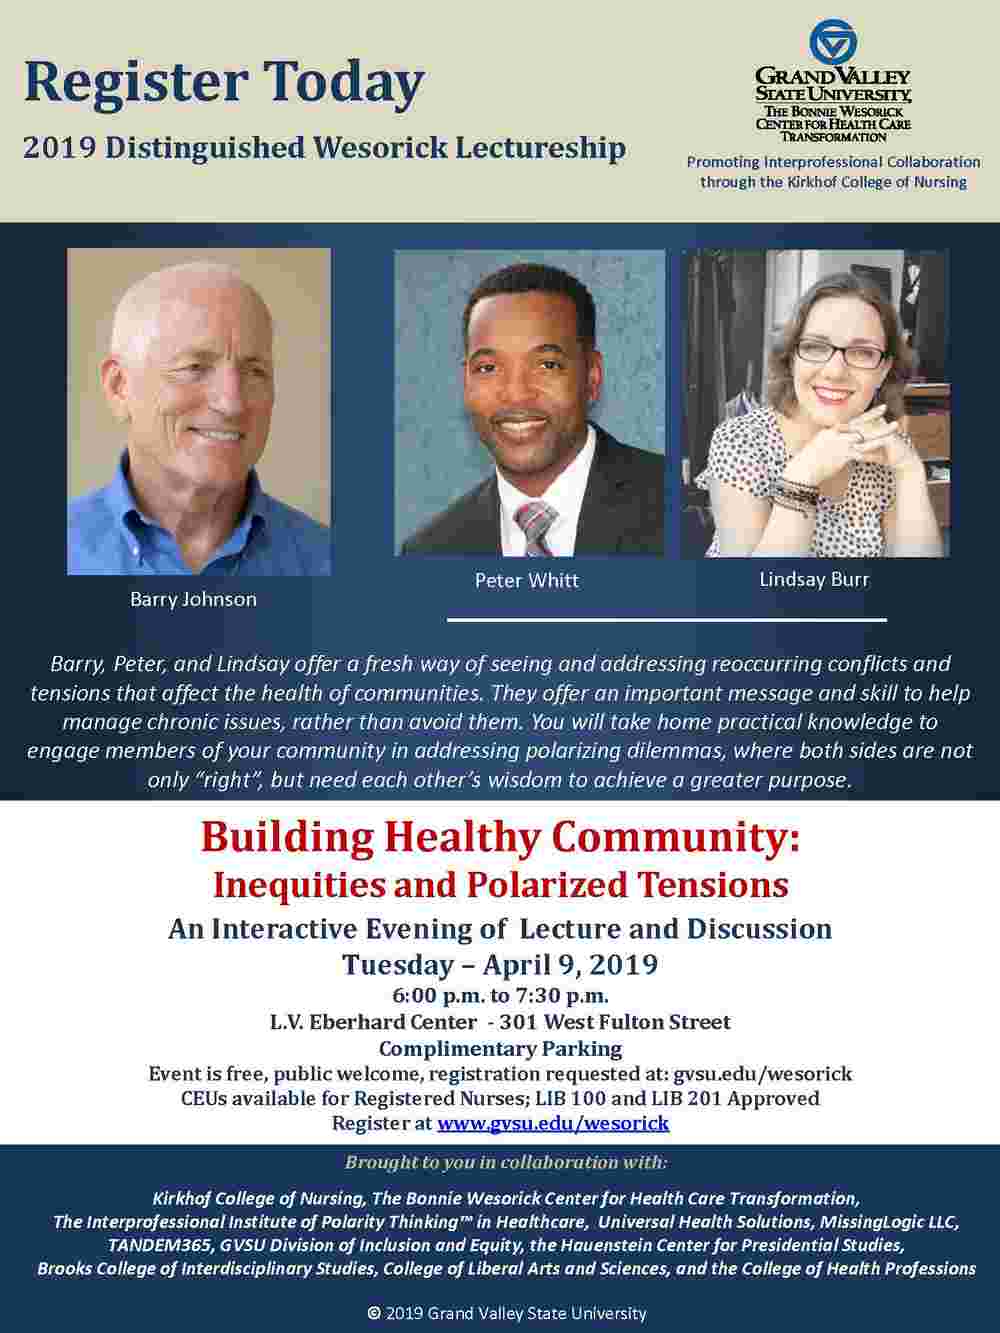 Building Healthy Community: Inequities and Polarized Tensions - April 2019